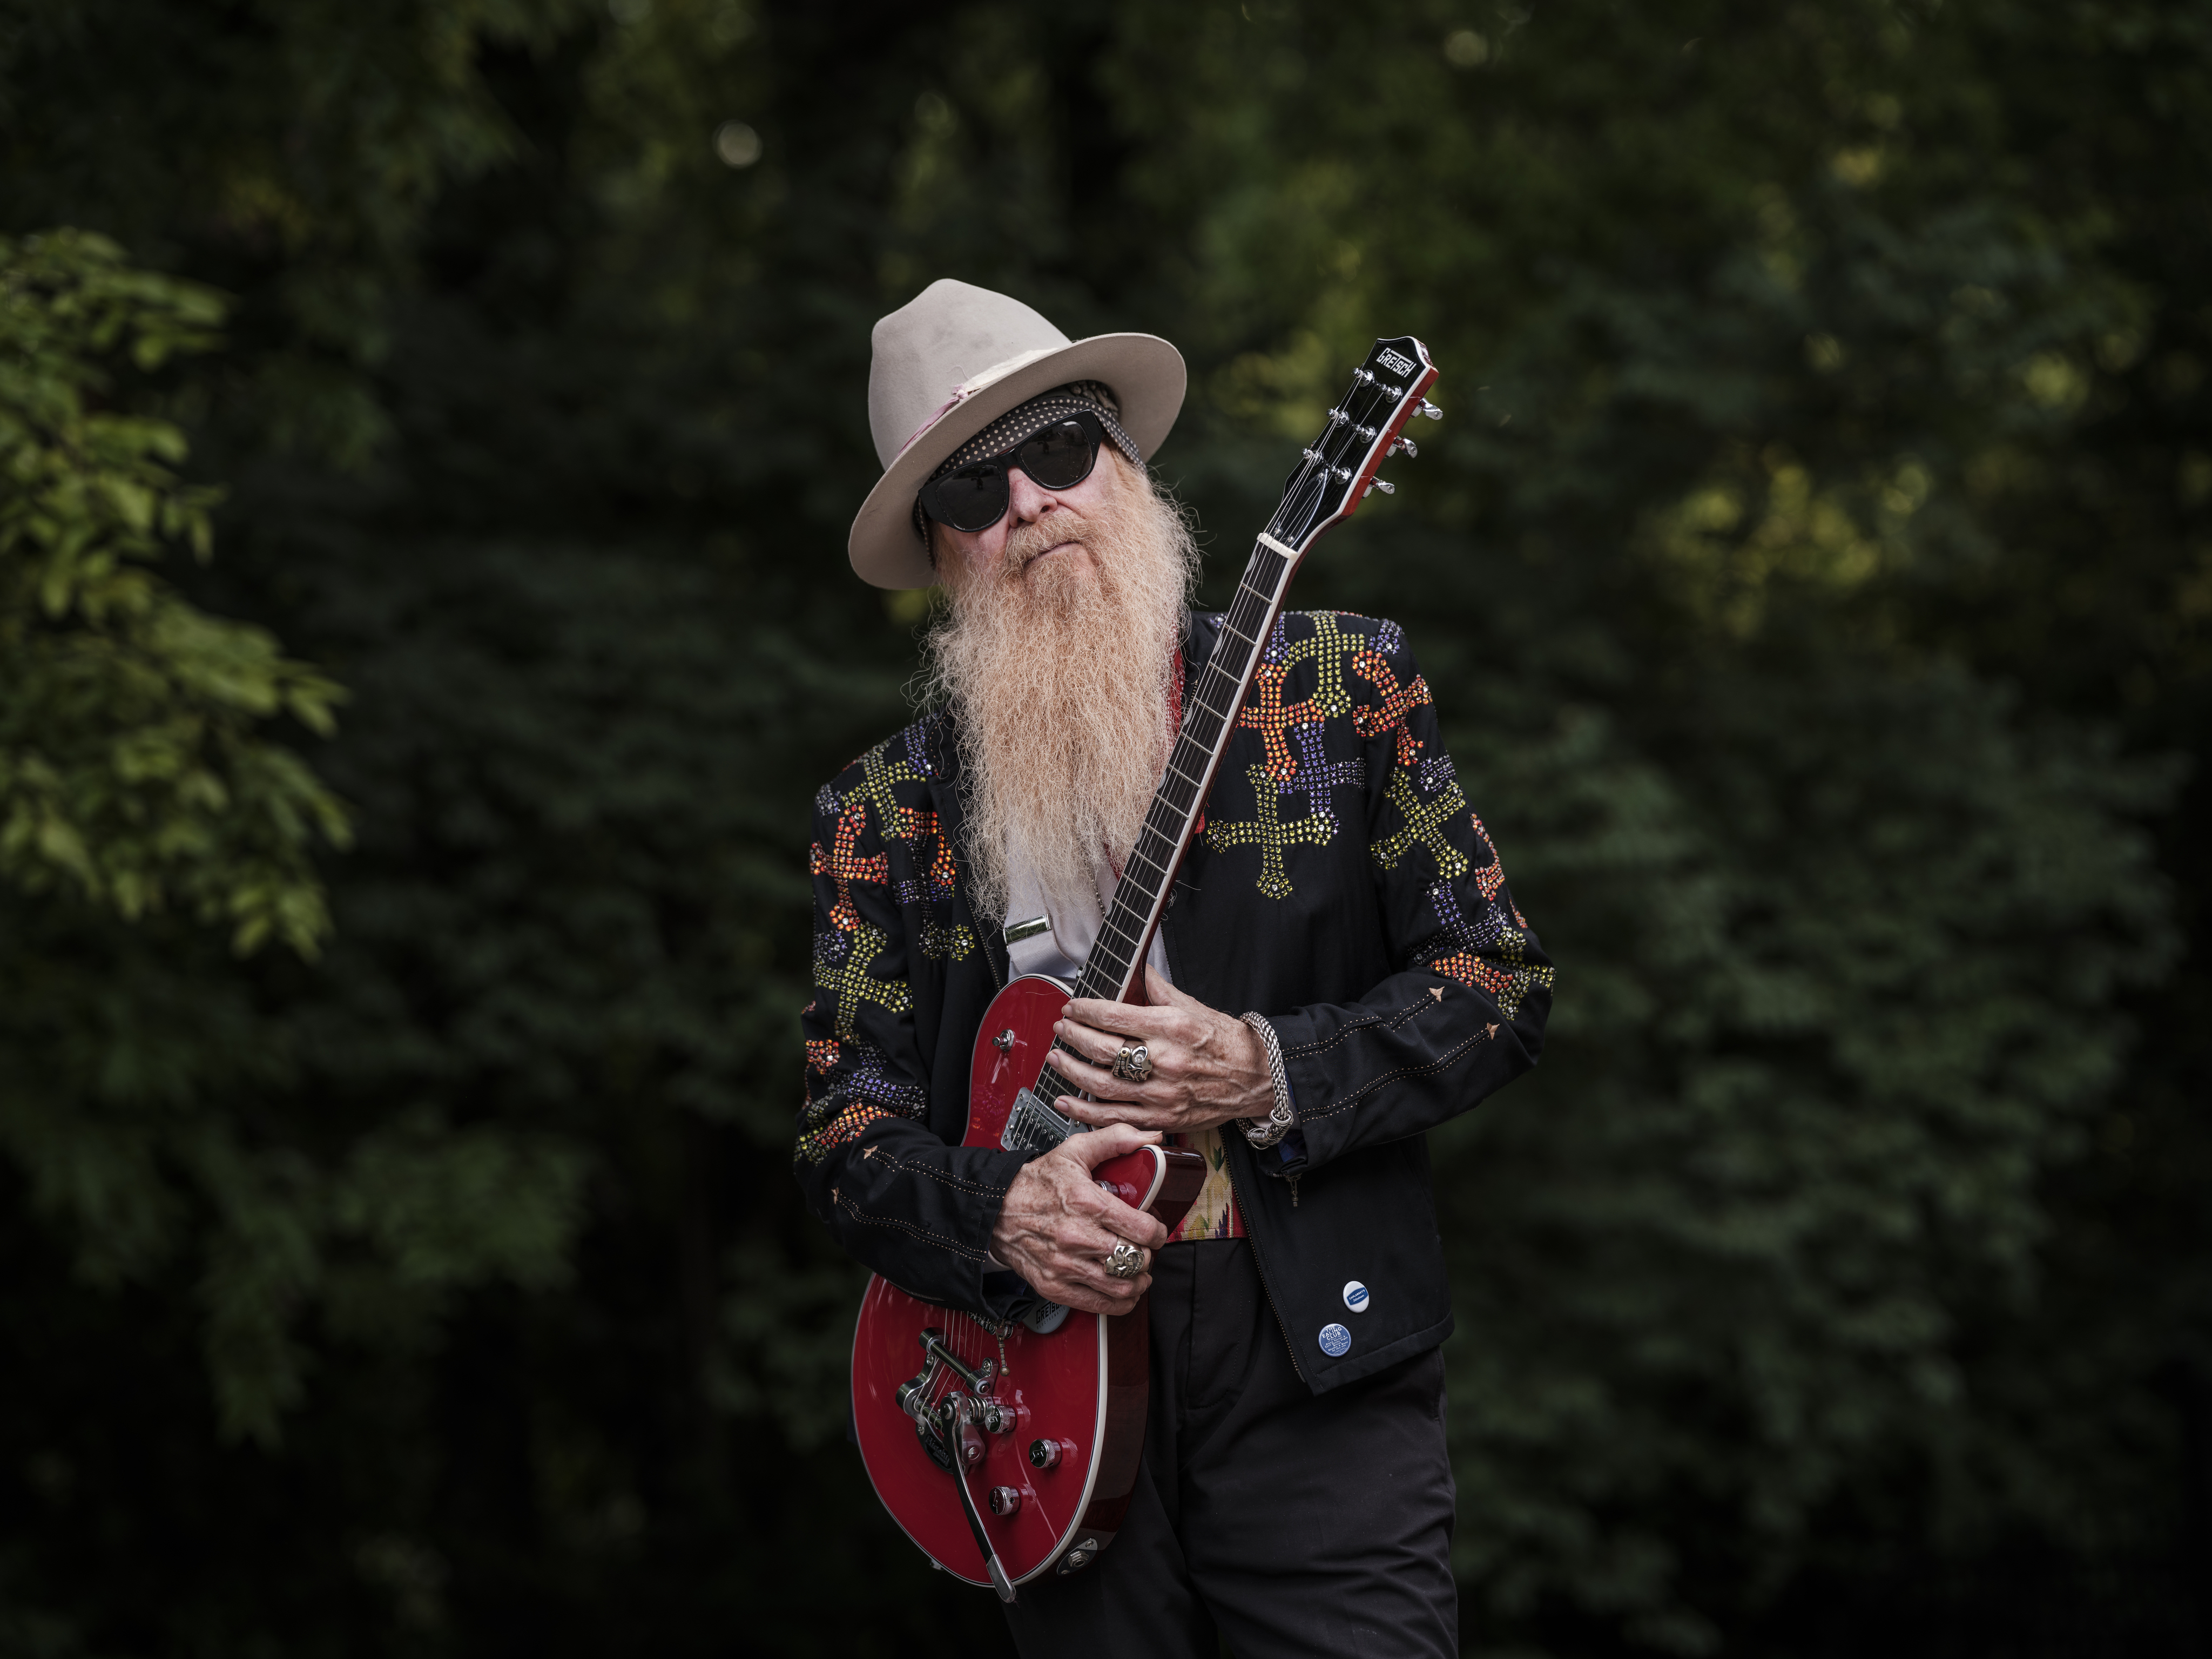 A year after losing Dallas-born bassist Hill, ZZ Top on